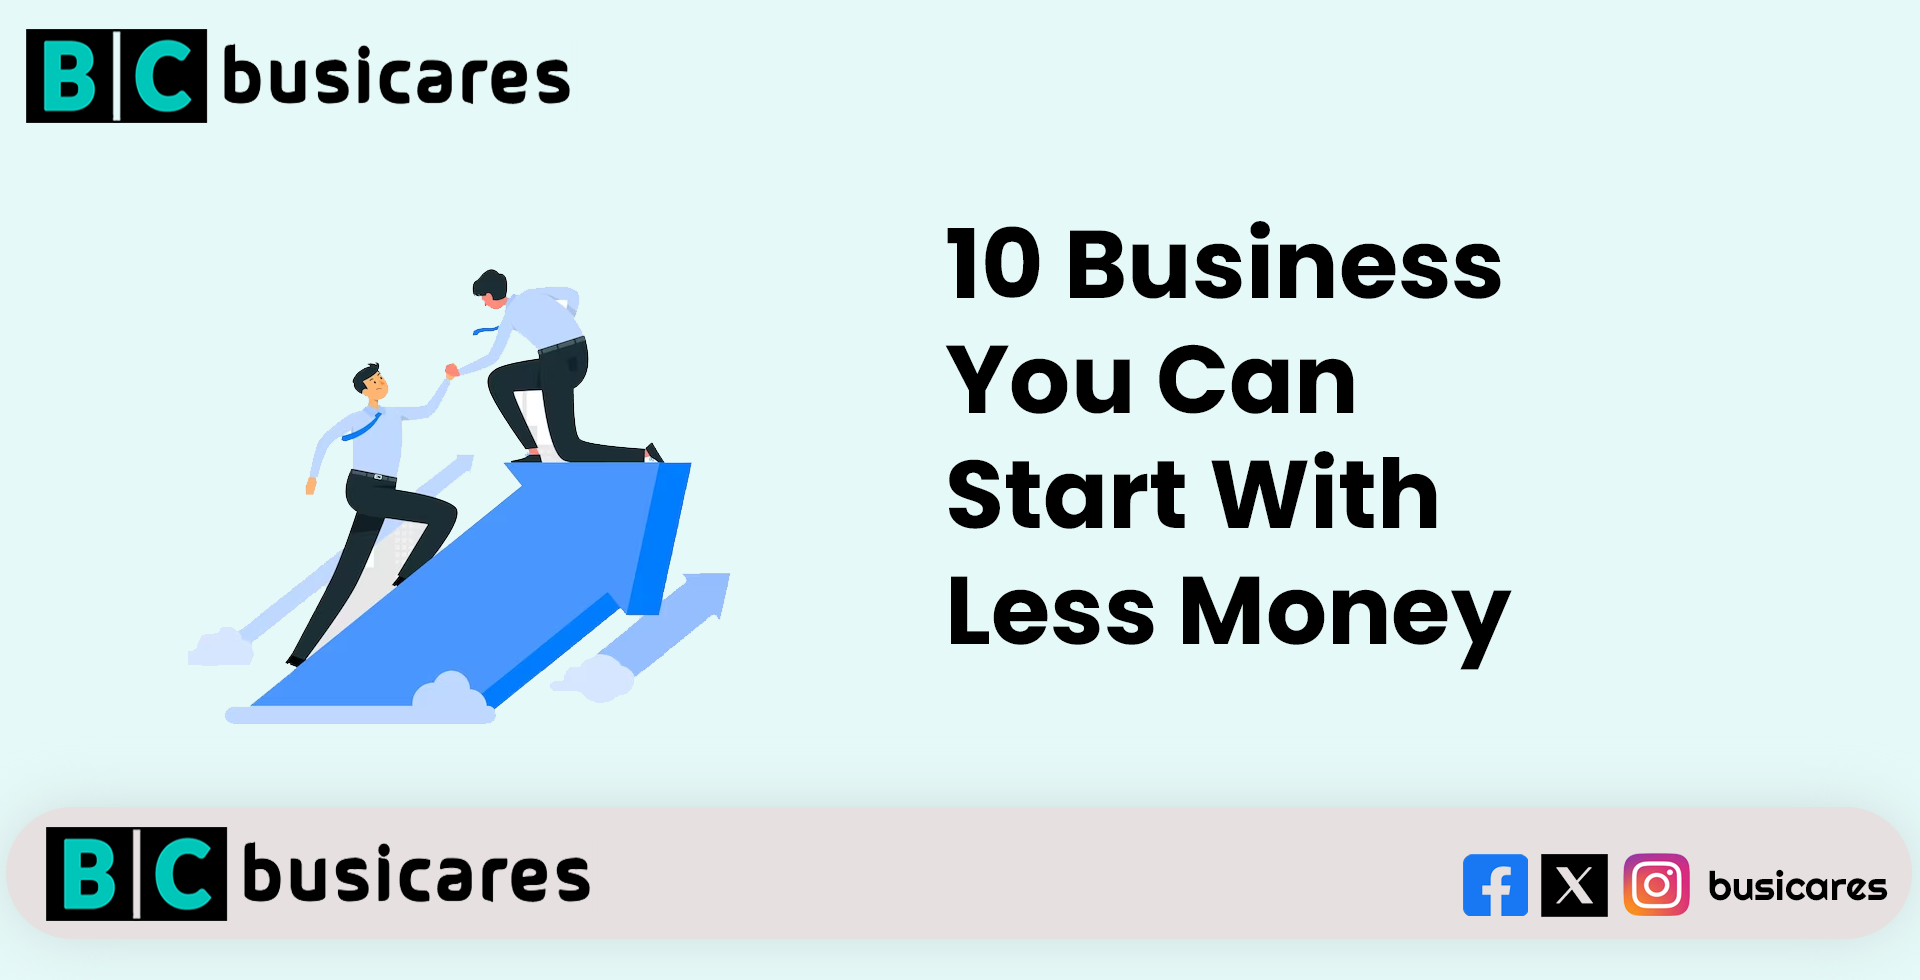 Busicares Solutions - 10 Business You Can Start With Less Money
